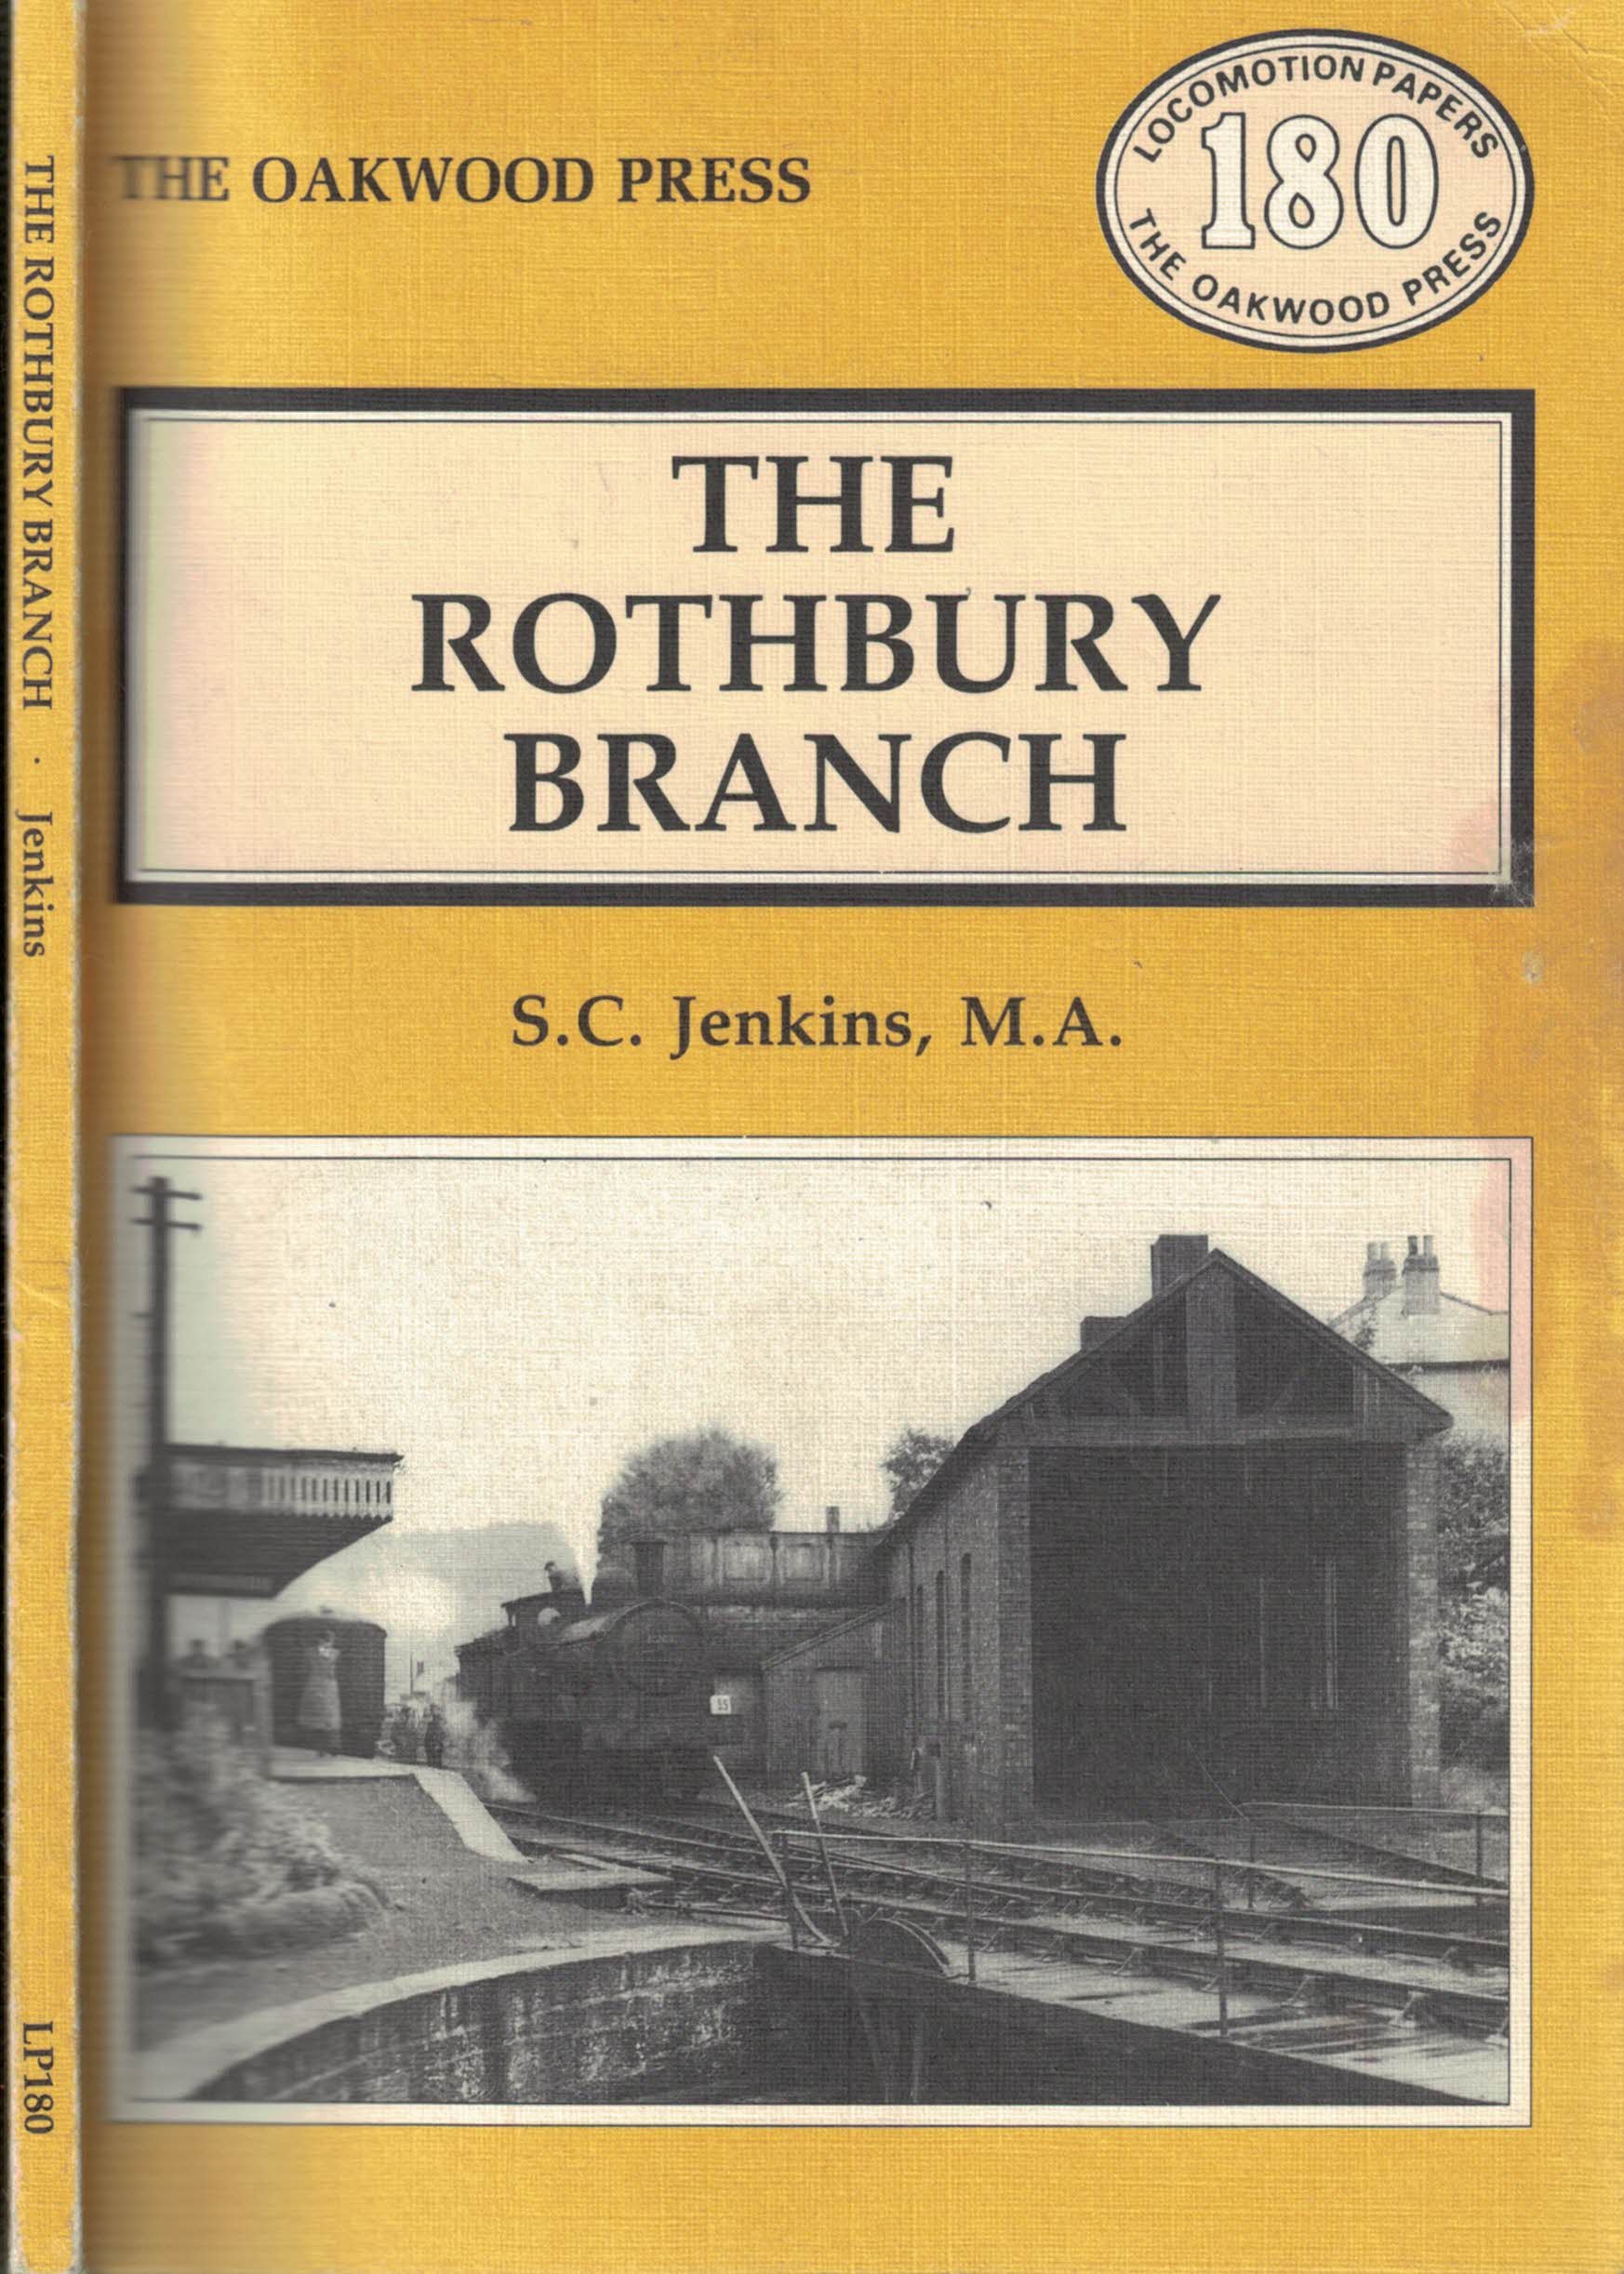 The Rothbury Branch. Oakwood Locomotion Papers No 180.